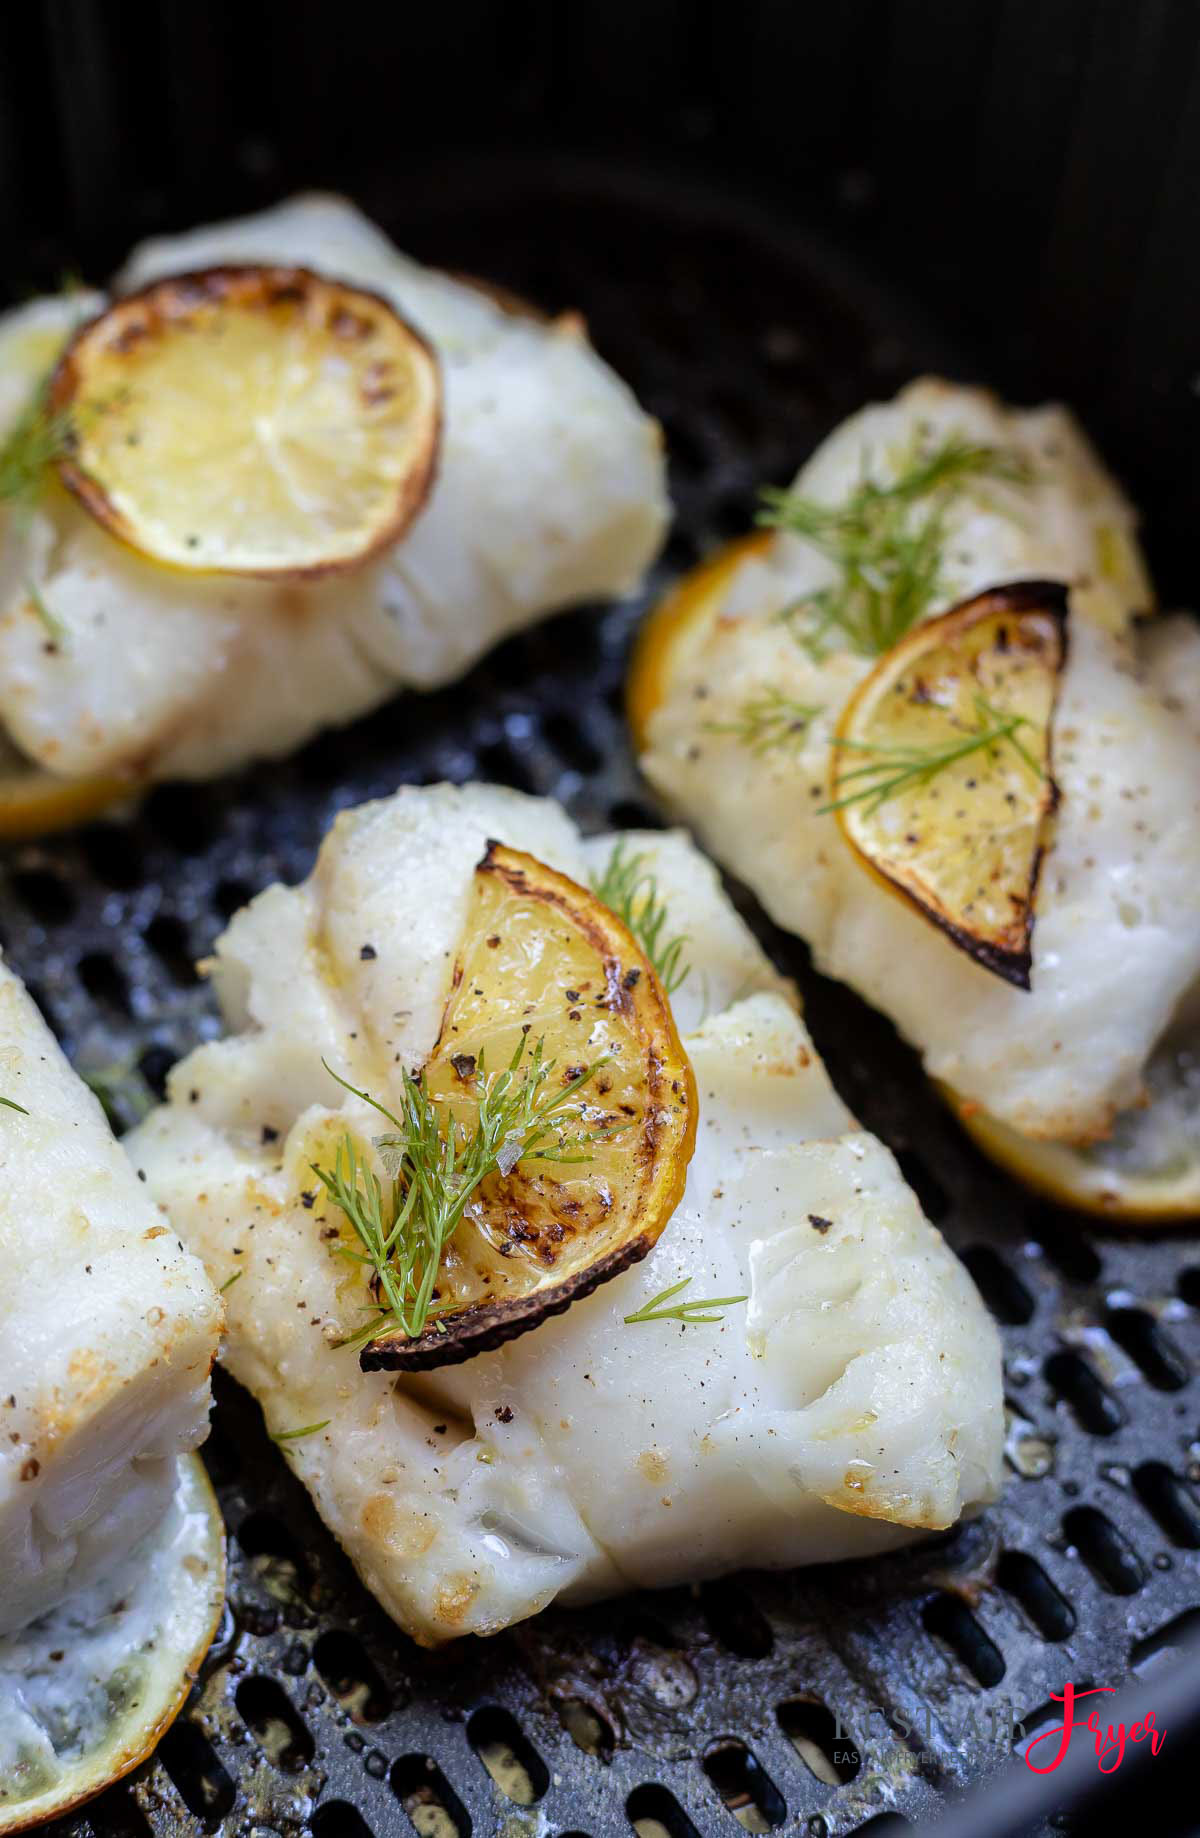 Fish for dinner is so easy with this Air Fryer Cod Recipe. Air fried cod with lemon and dill is a healthy, flavorful low carb meal.